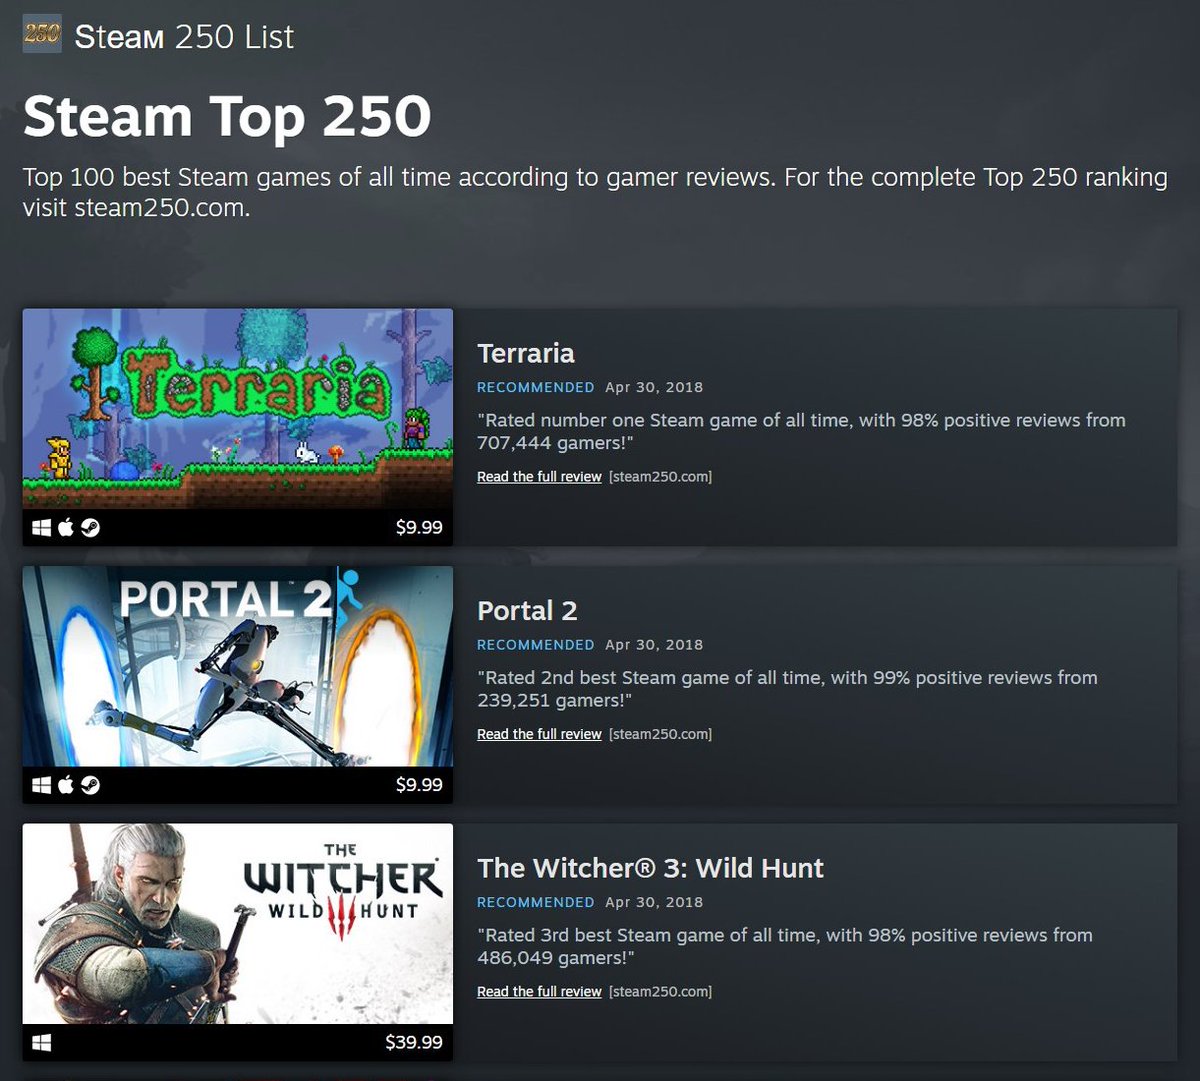 Steam Top 250 Top 250 best Steam games of all time according to